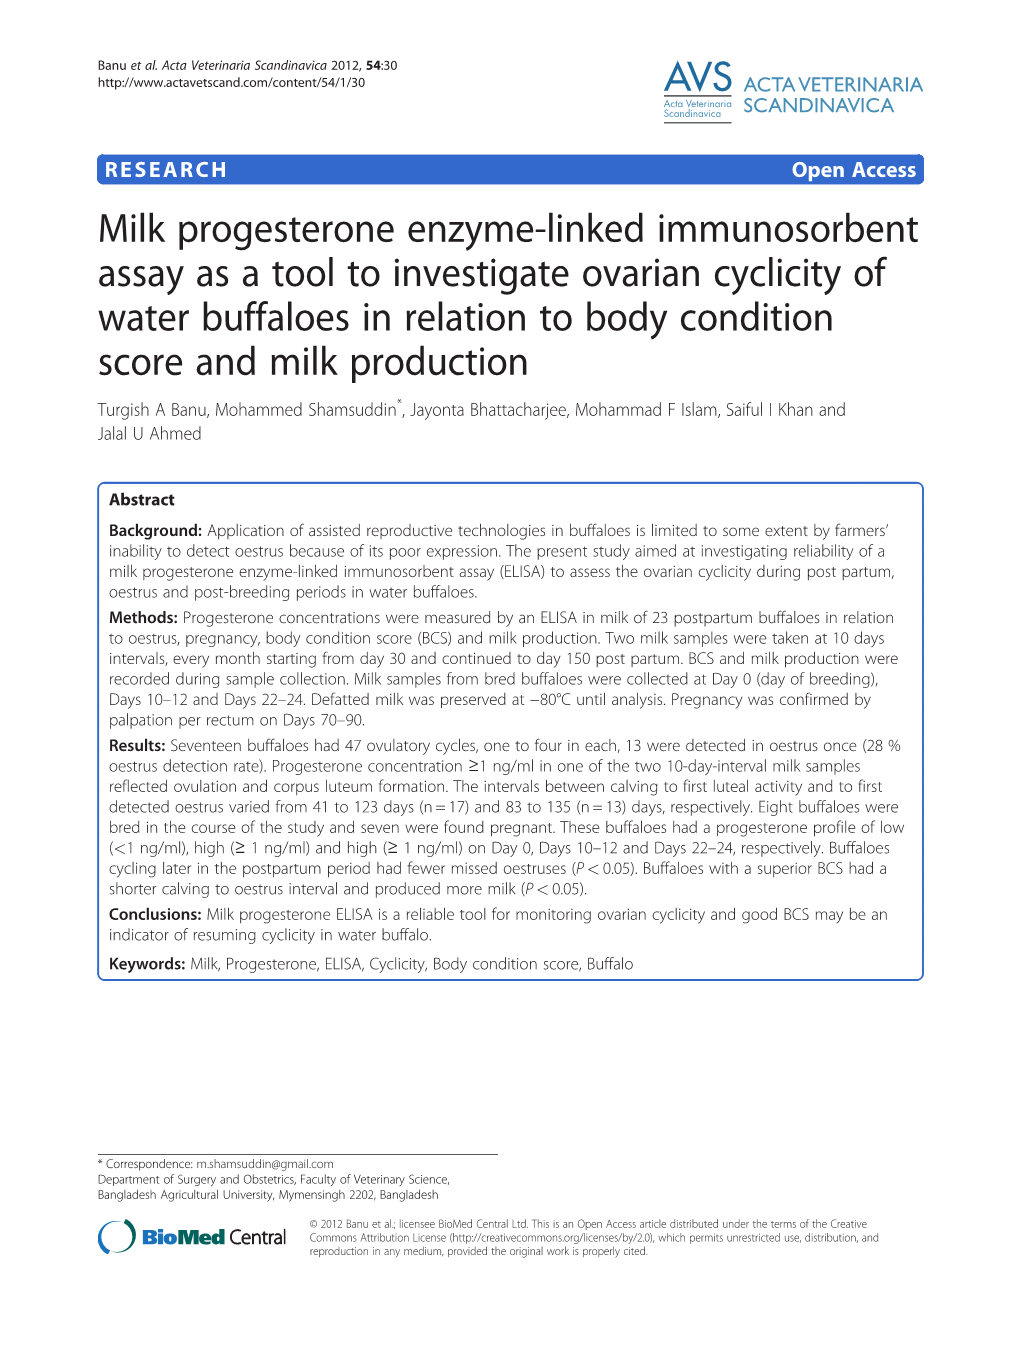 Milk Progesterone Enzyme-Linked Immunosorbent Assay As a Tool To